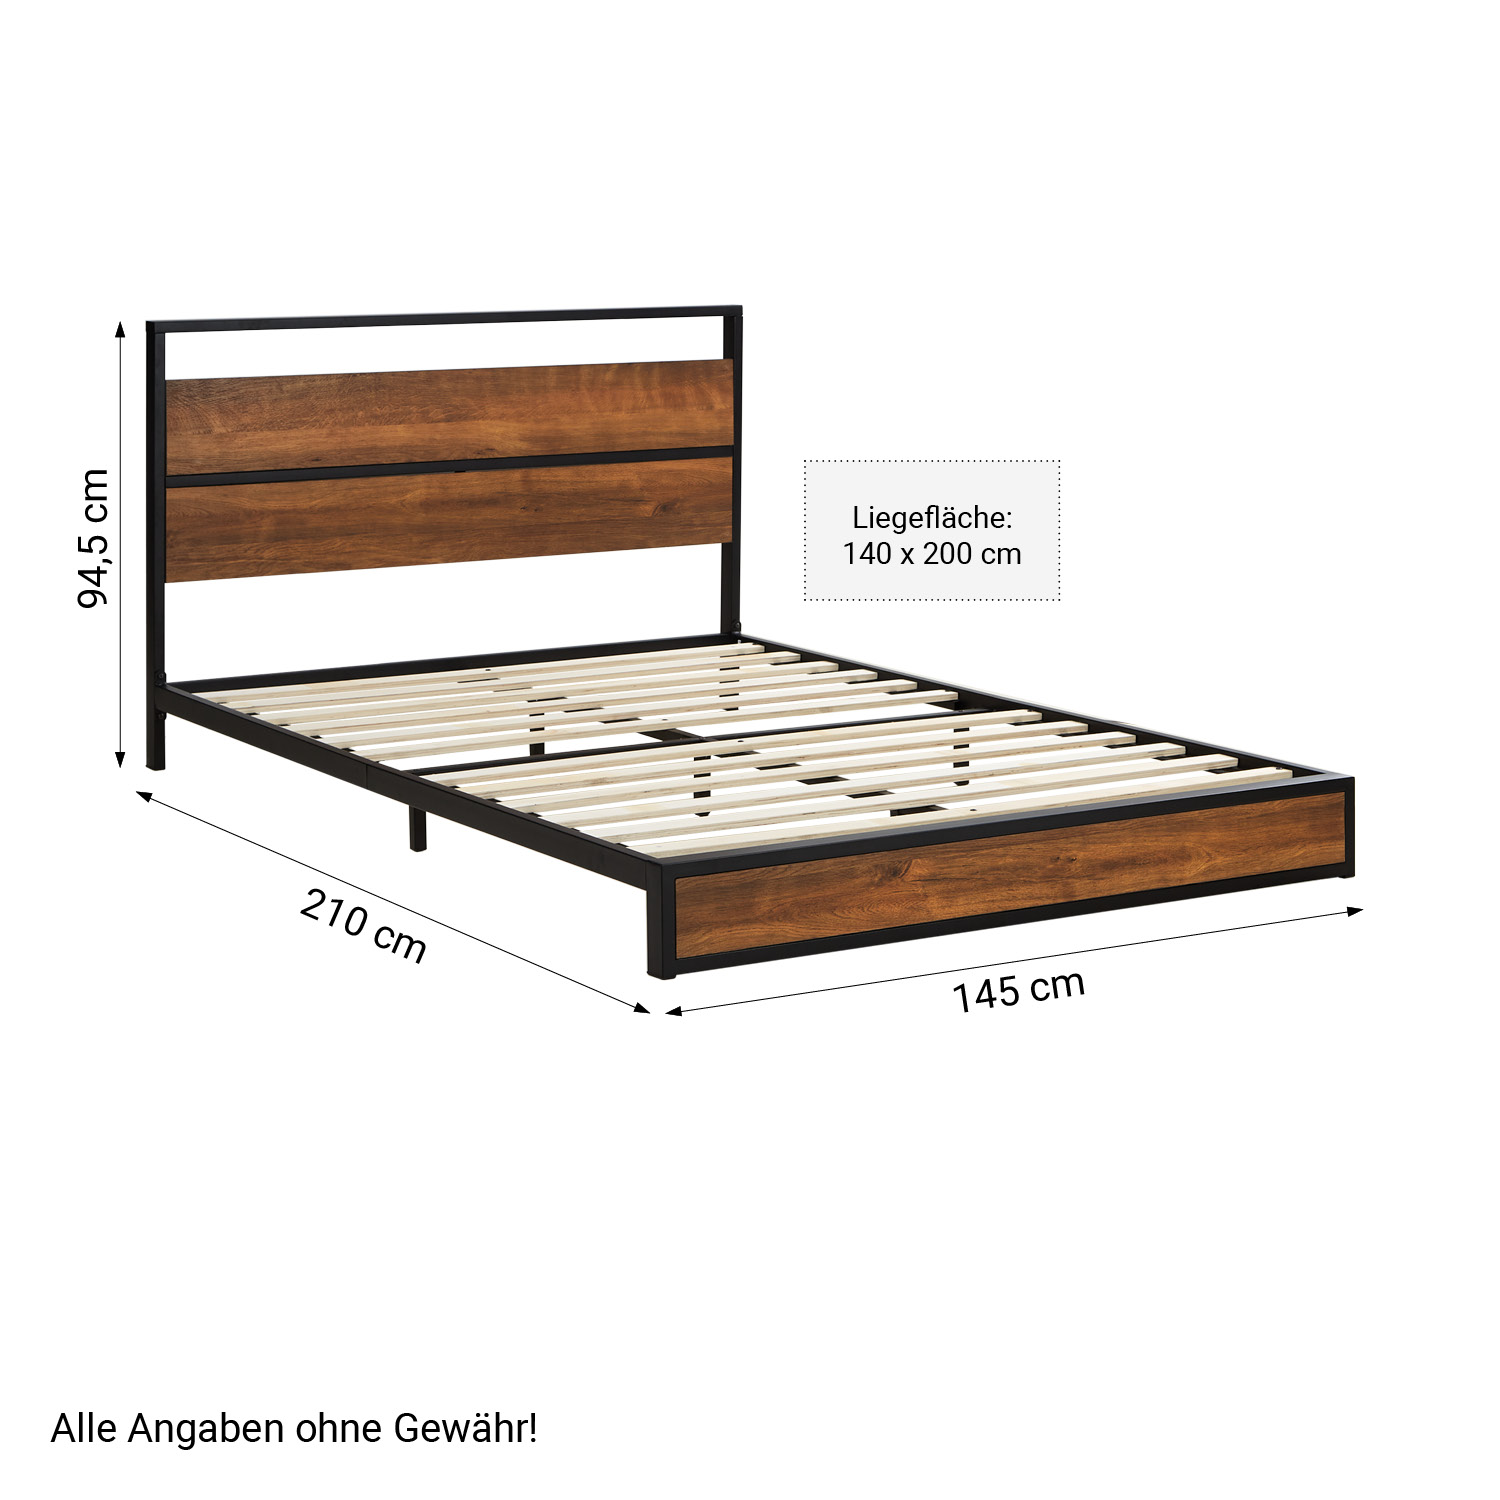 Solid Metal Bed with Mattress 140x200 cm Slatts Double Bed Black Futon Bed Wood Brown Platform Bed Frame Guest Bed 